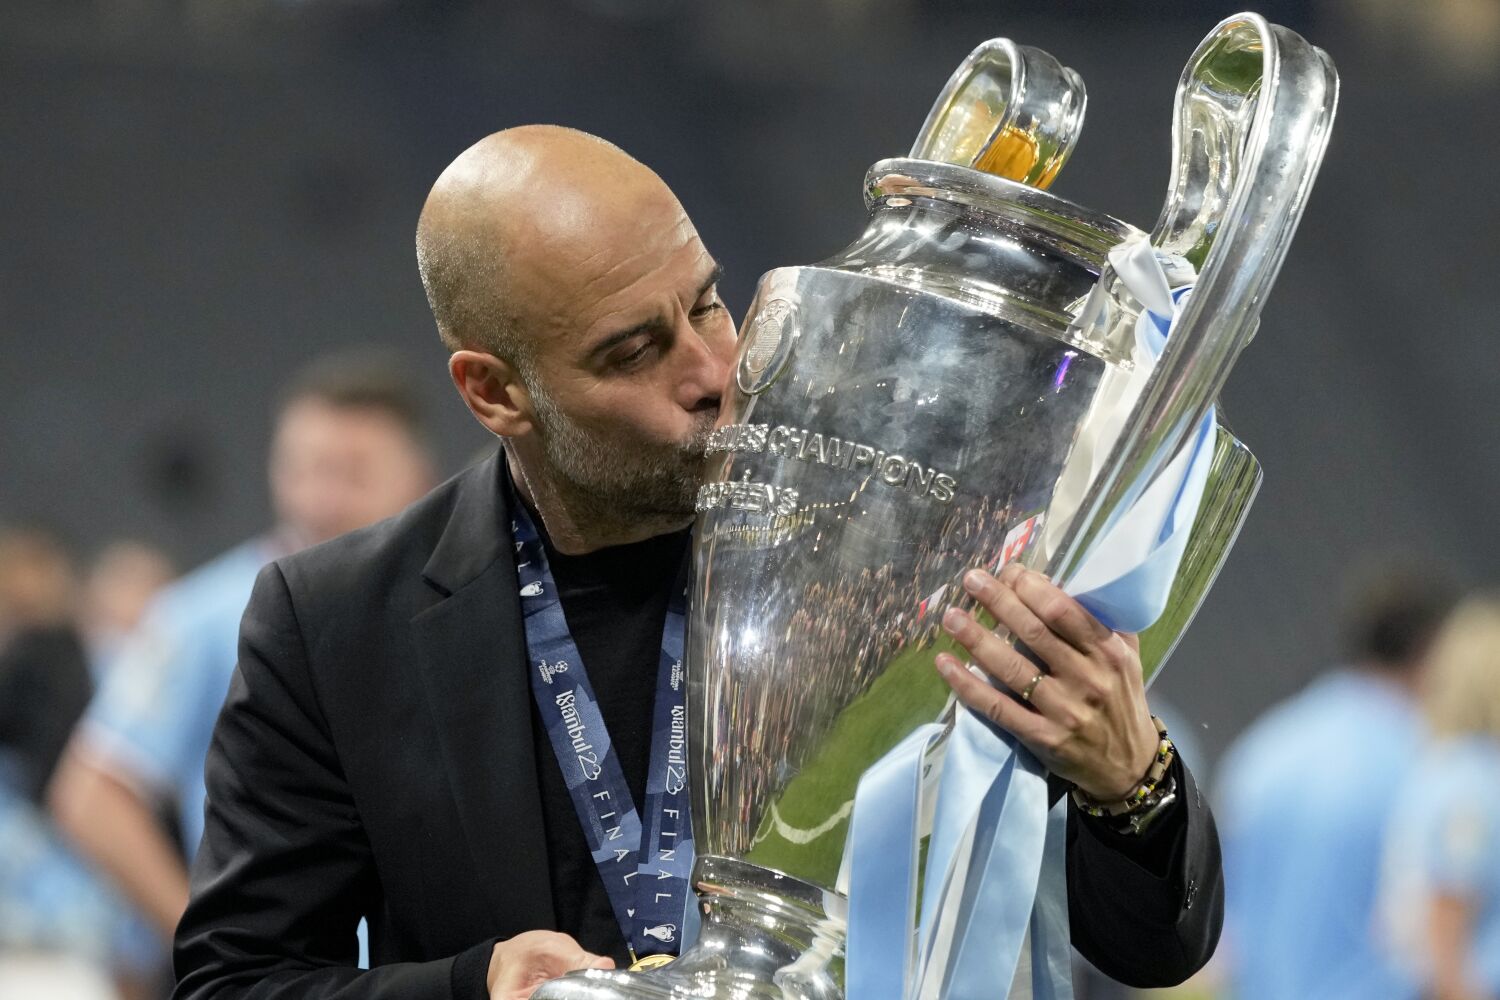 Commentary: Pep Guardiola should leave Manchester City before sanctions tarnish his legacy